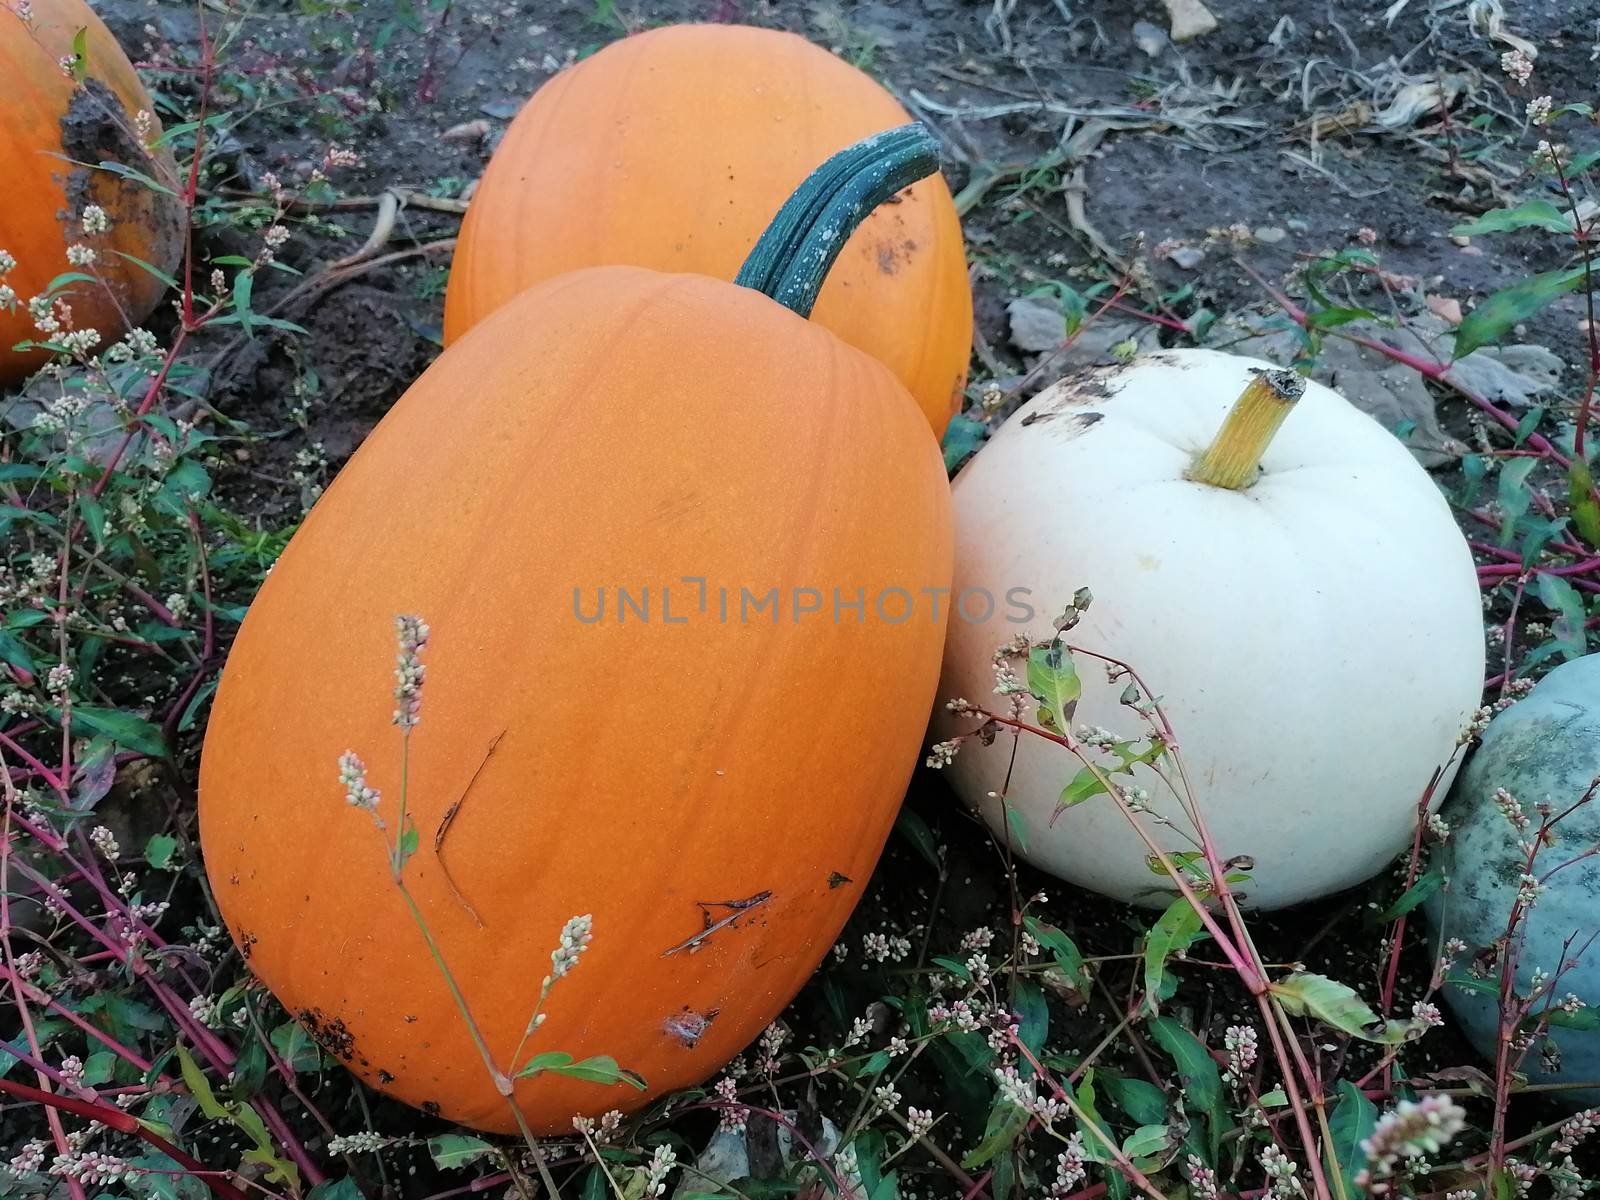 Three big pumpkins growing in a field. Orange and white skins ready for halloween